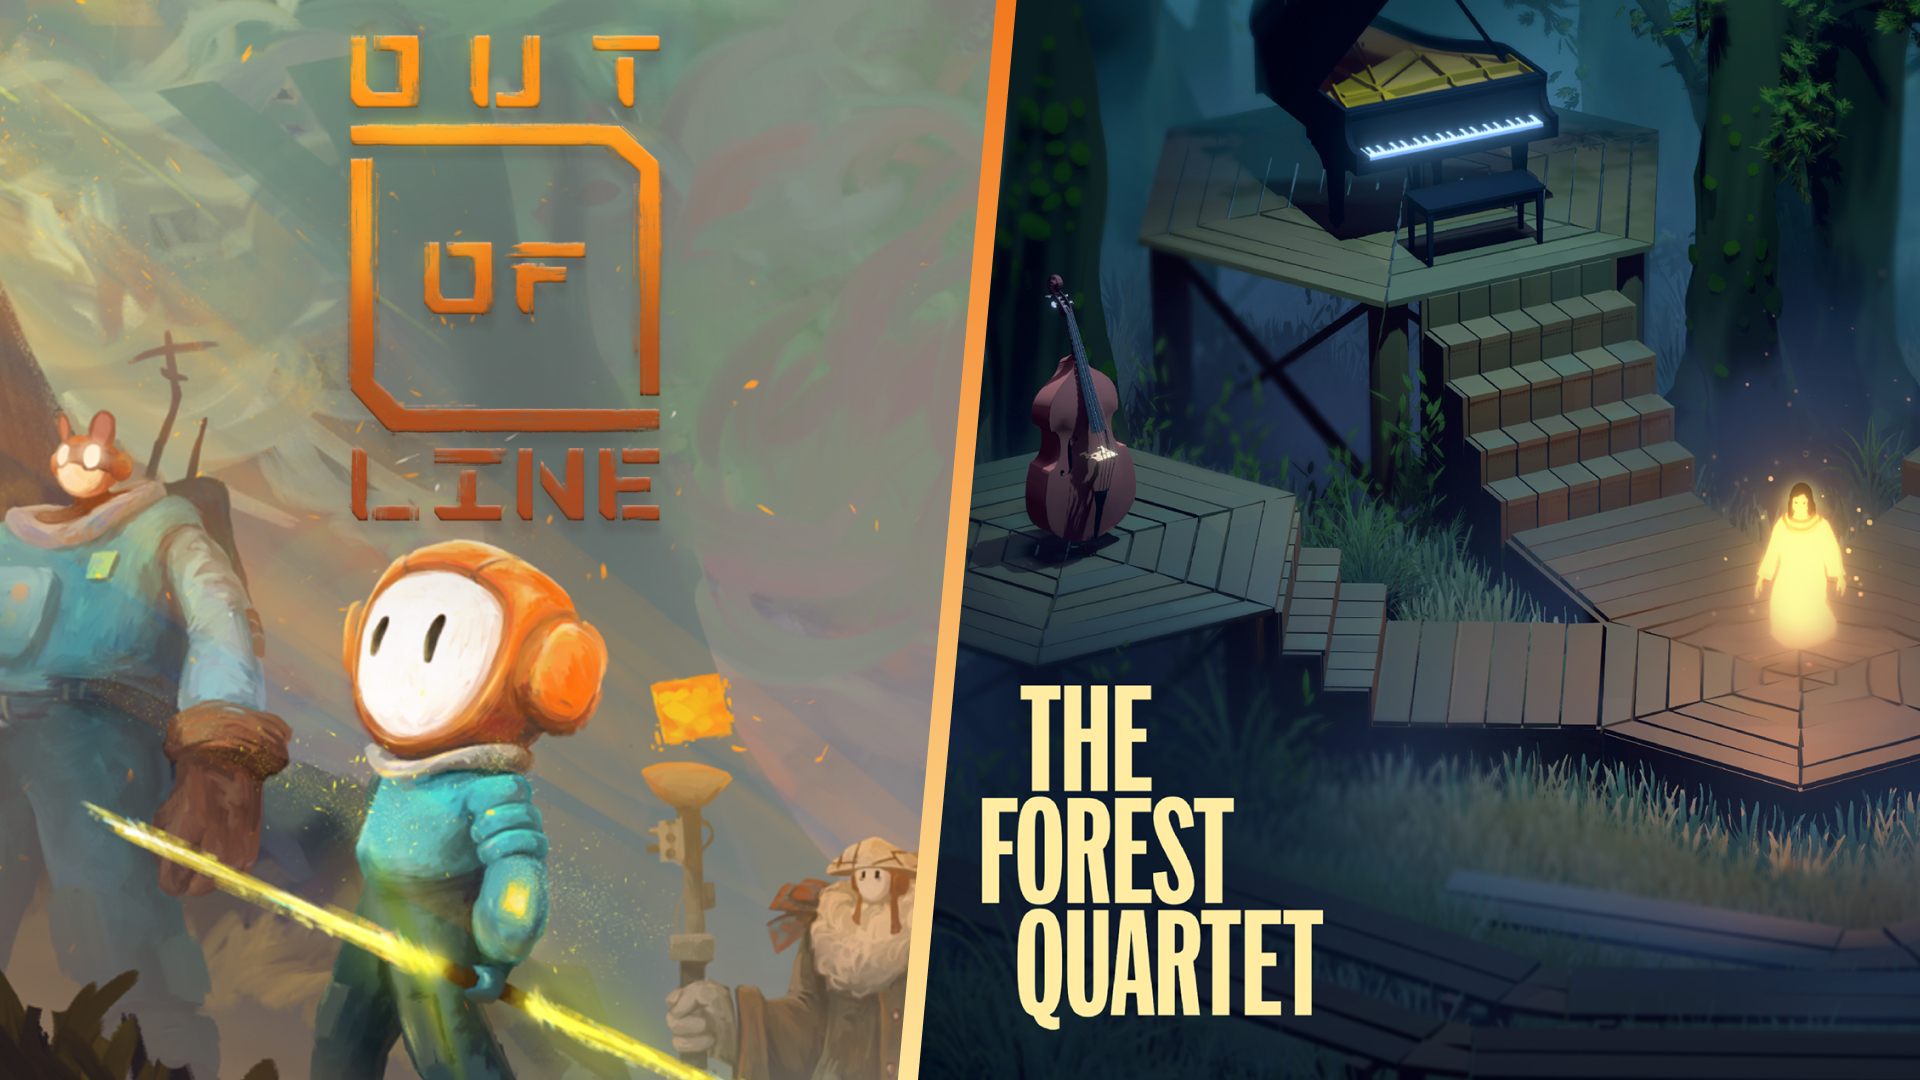 Epic Games Store on X: This week's free games are a bit puzzling 🤔🧩  Grab Out of Line and The Forest Quartet for FREE this week!    / X